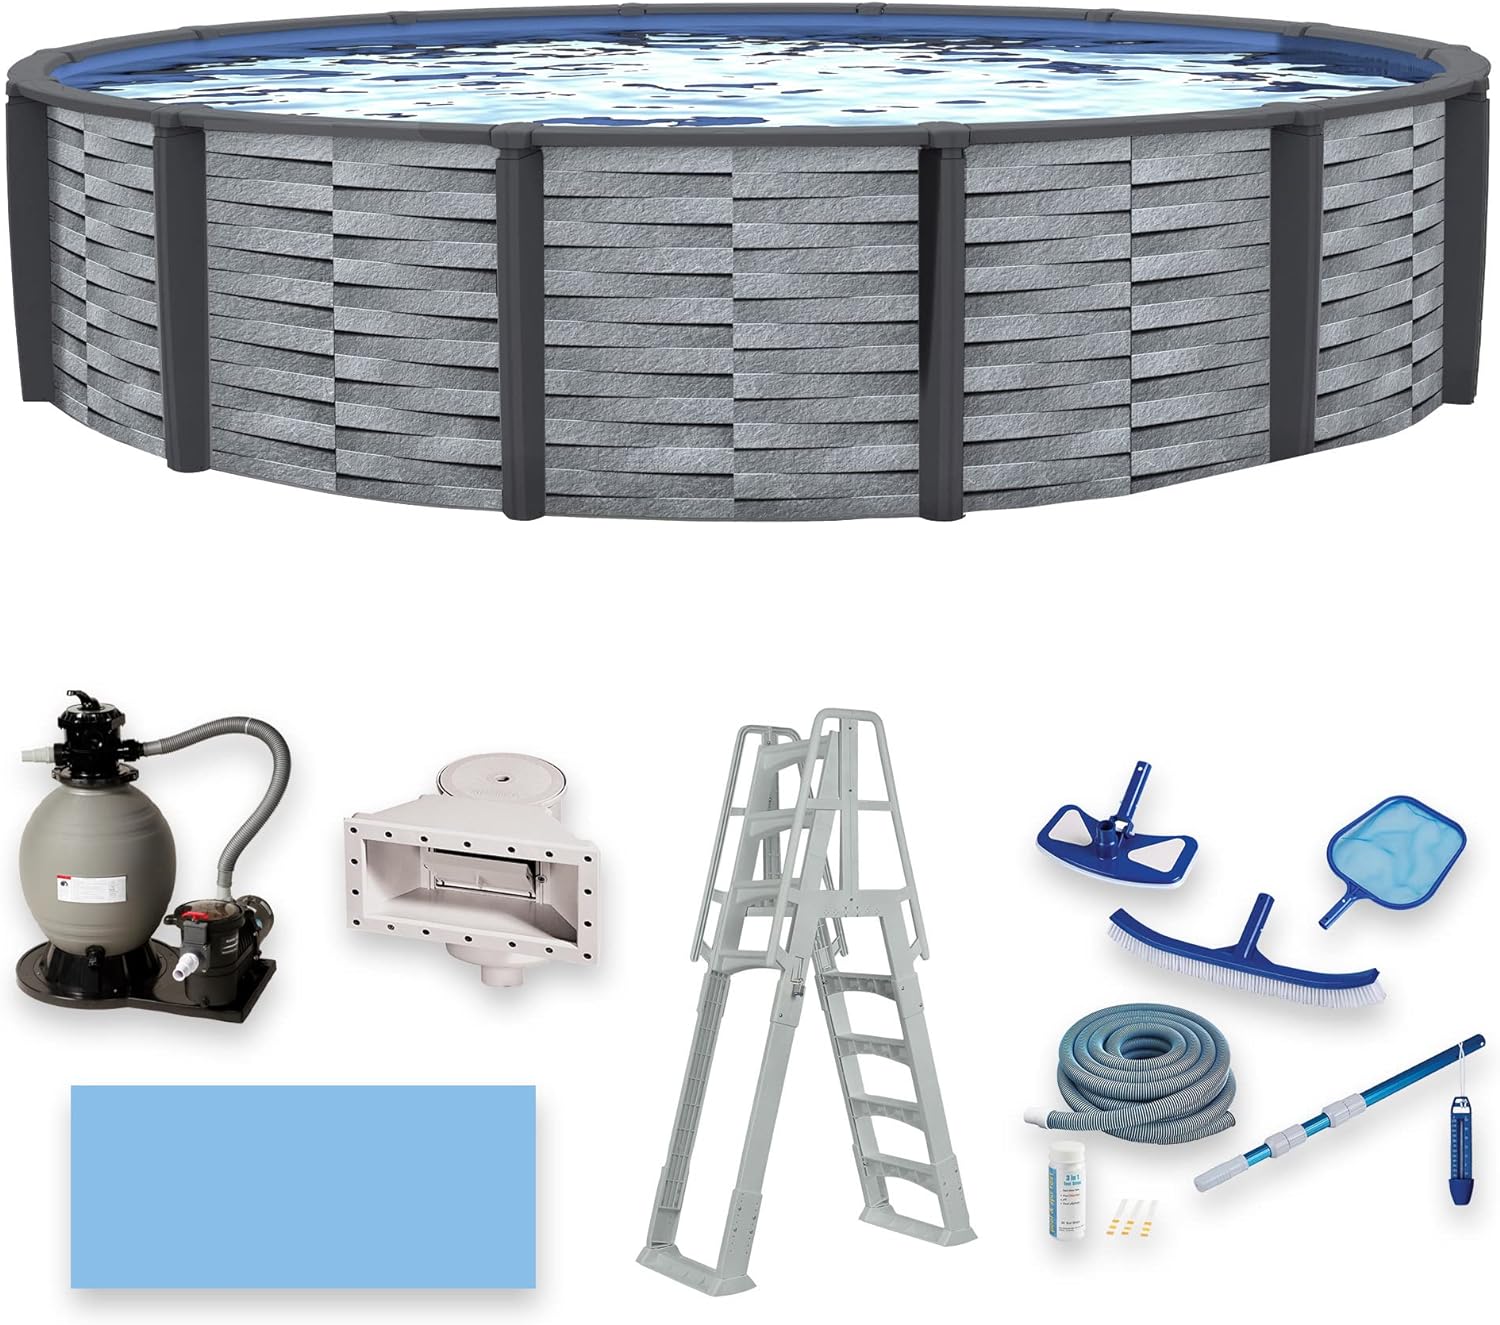 Affinity 15' Round 52" Deep 7" Top Rail Resin Package Above Ground Swimming Pool